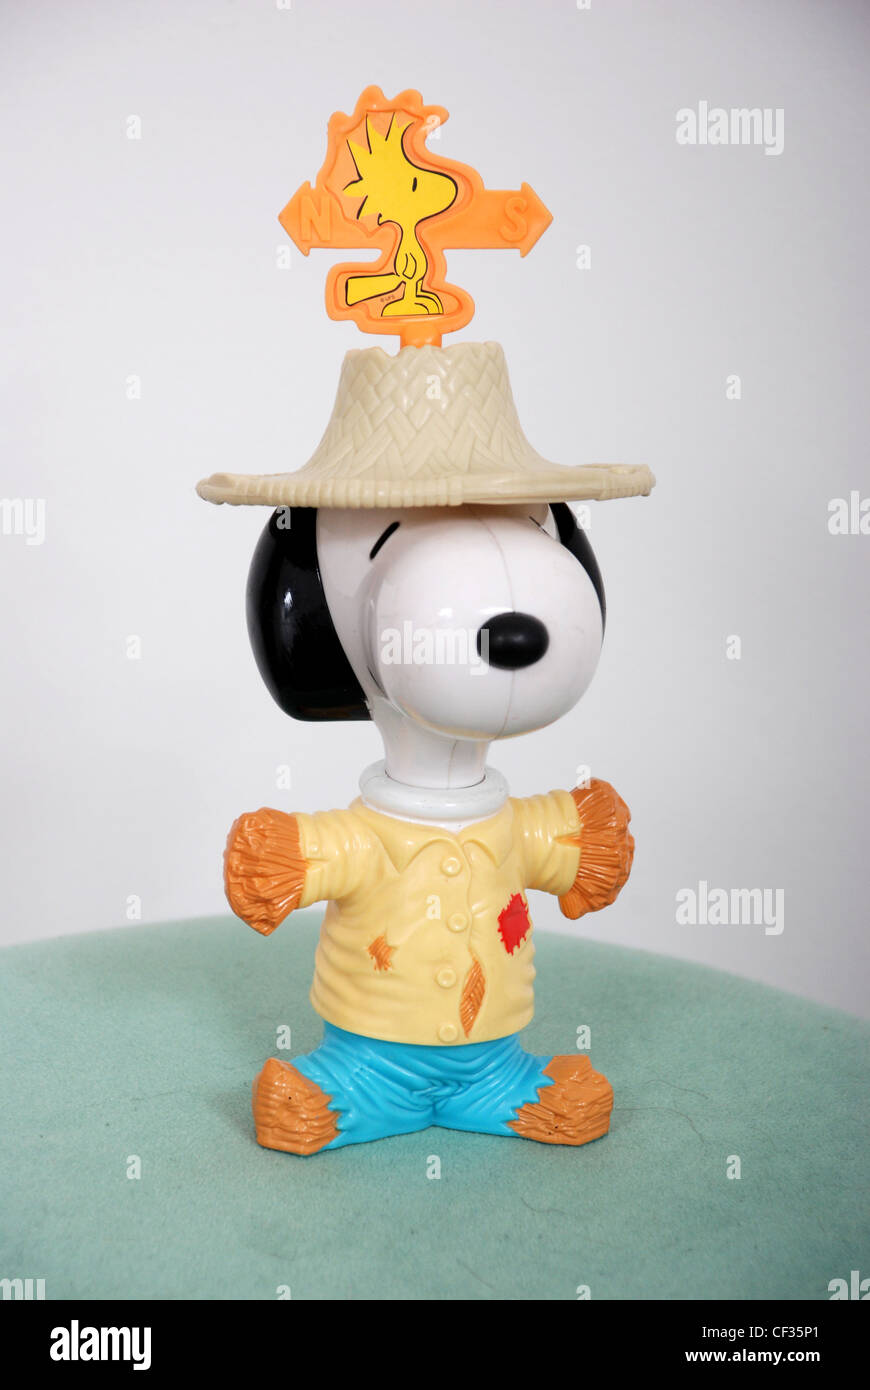 Plastic toy of famous dog from cartoons Stock Photo